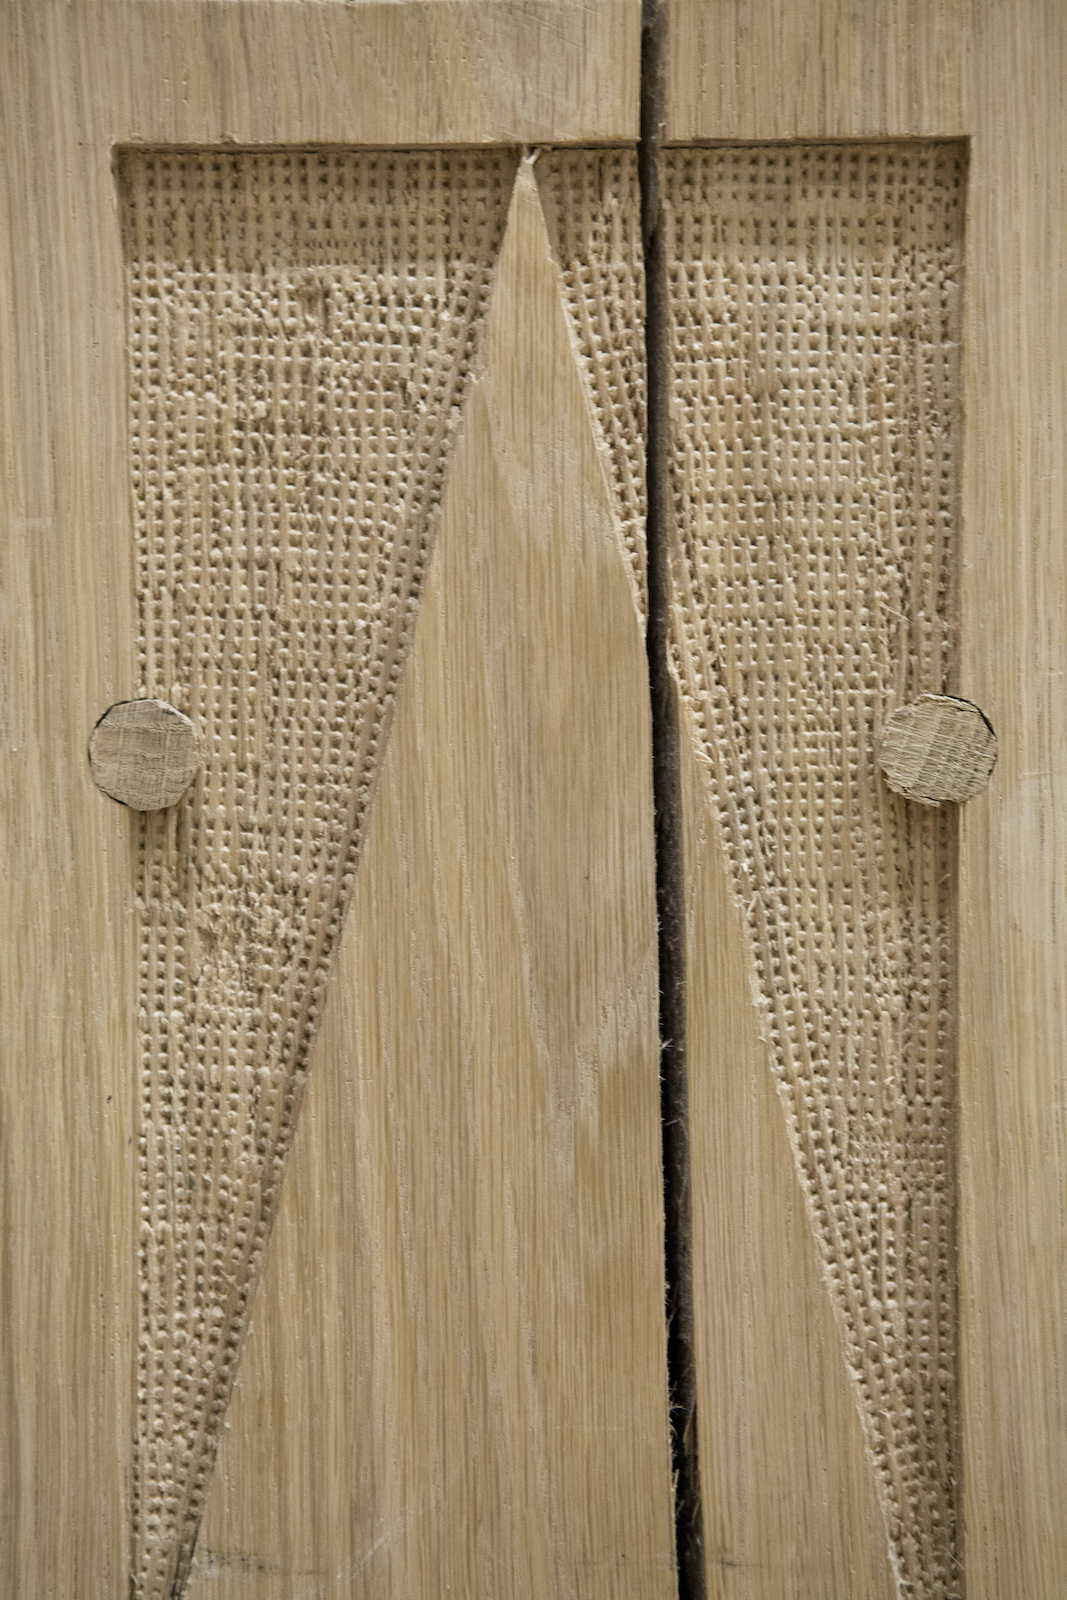 A close up of a wooden material with textured patterns carved into it